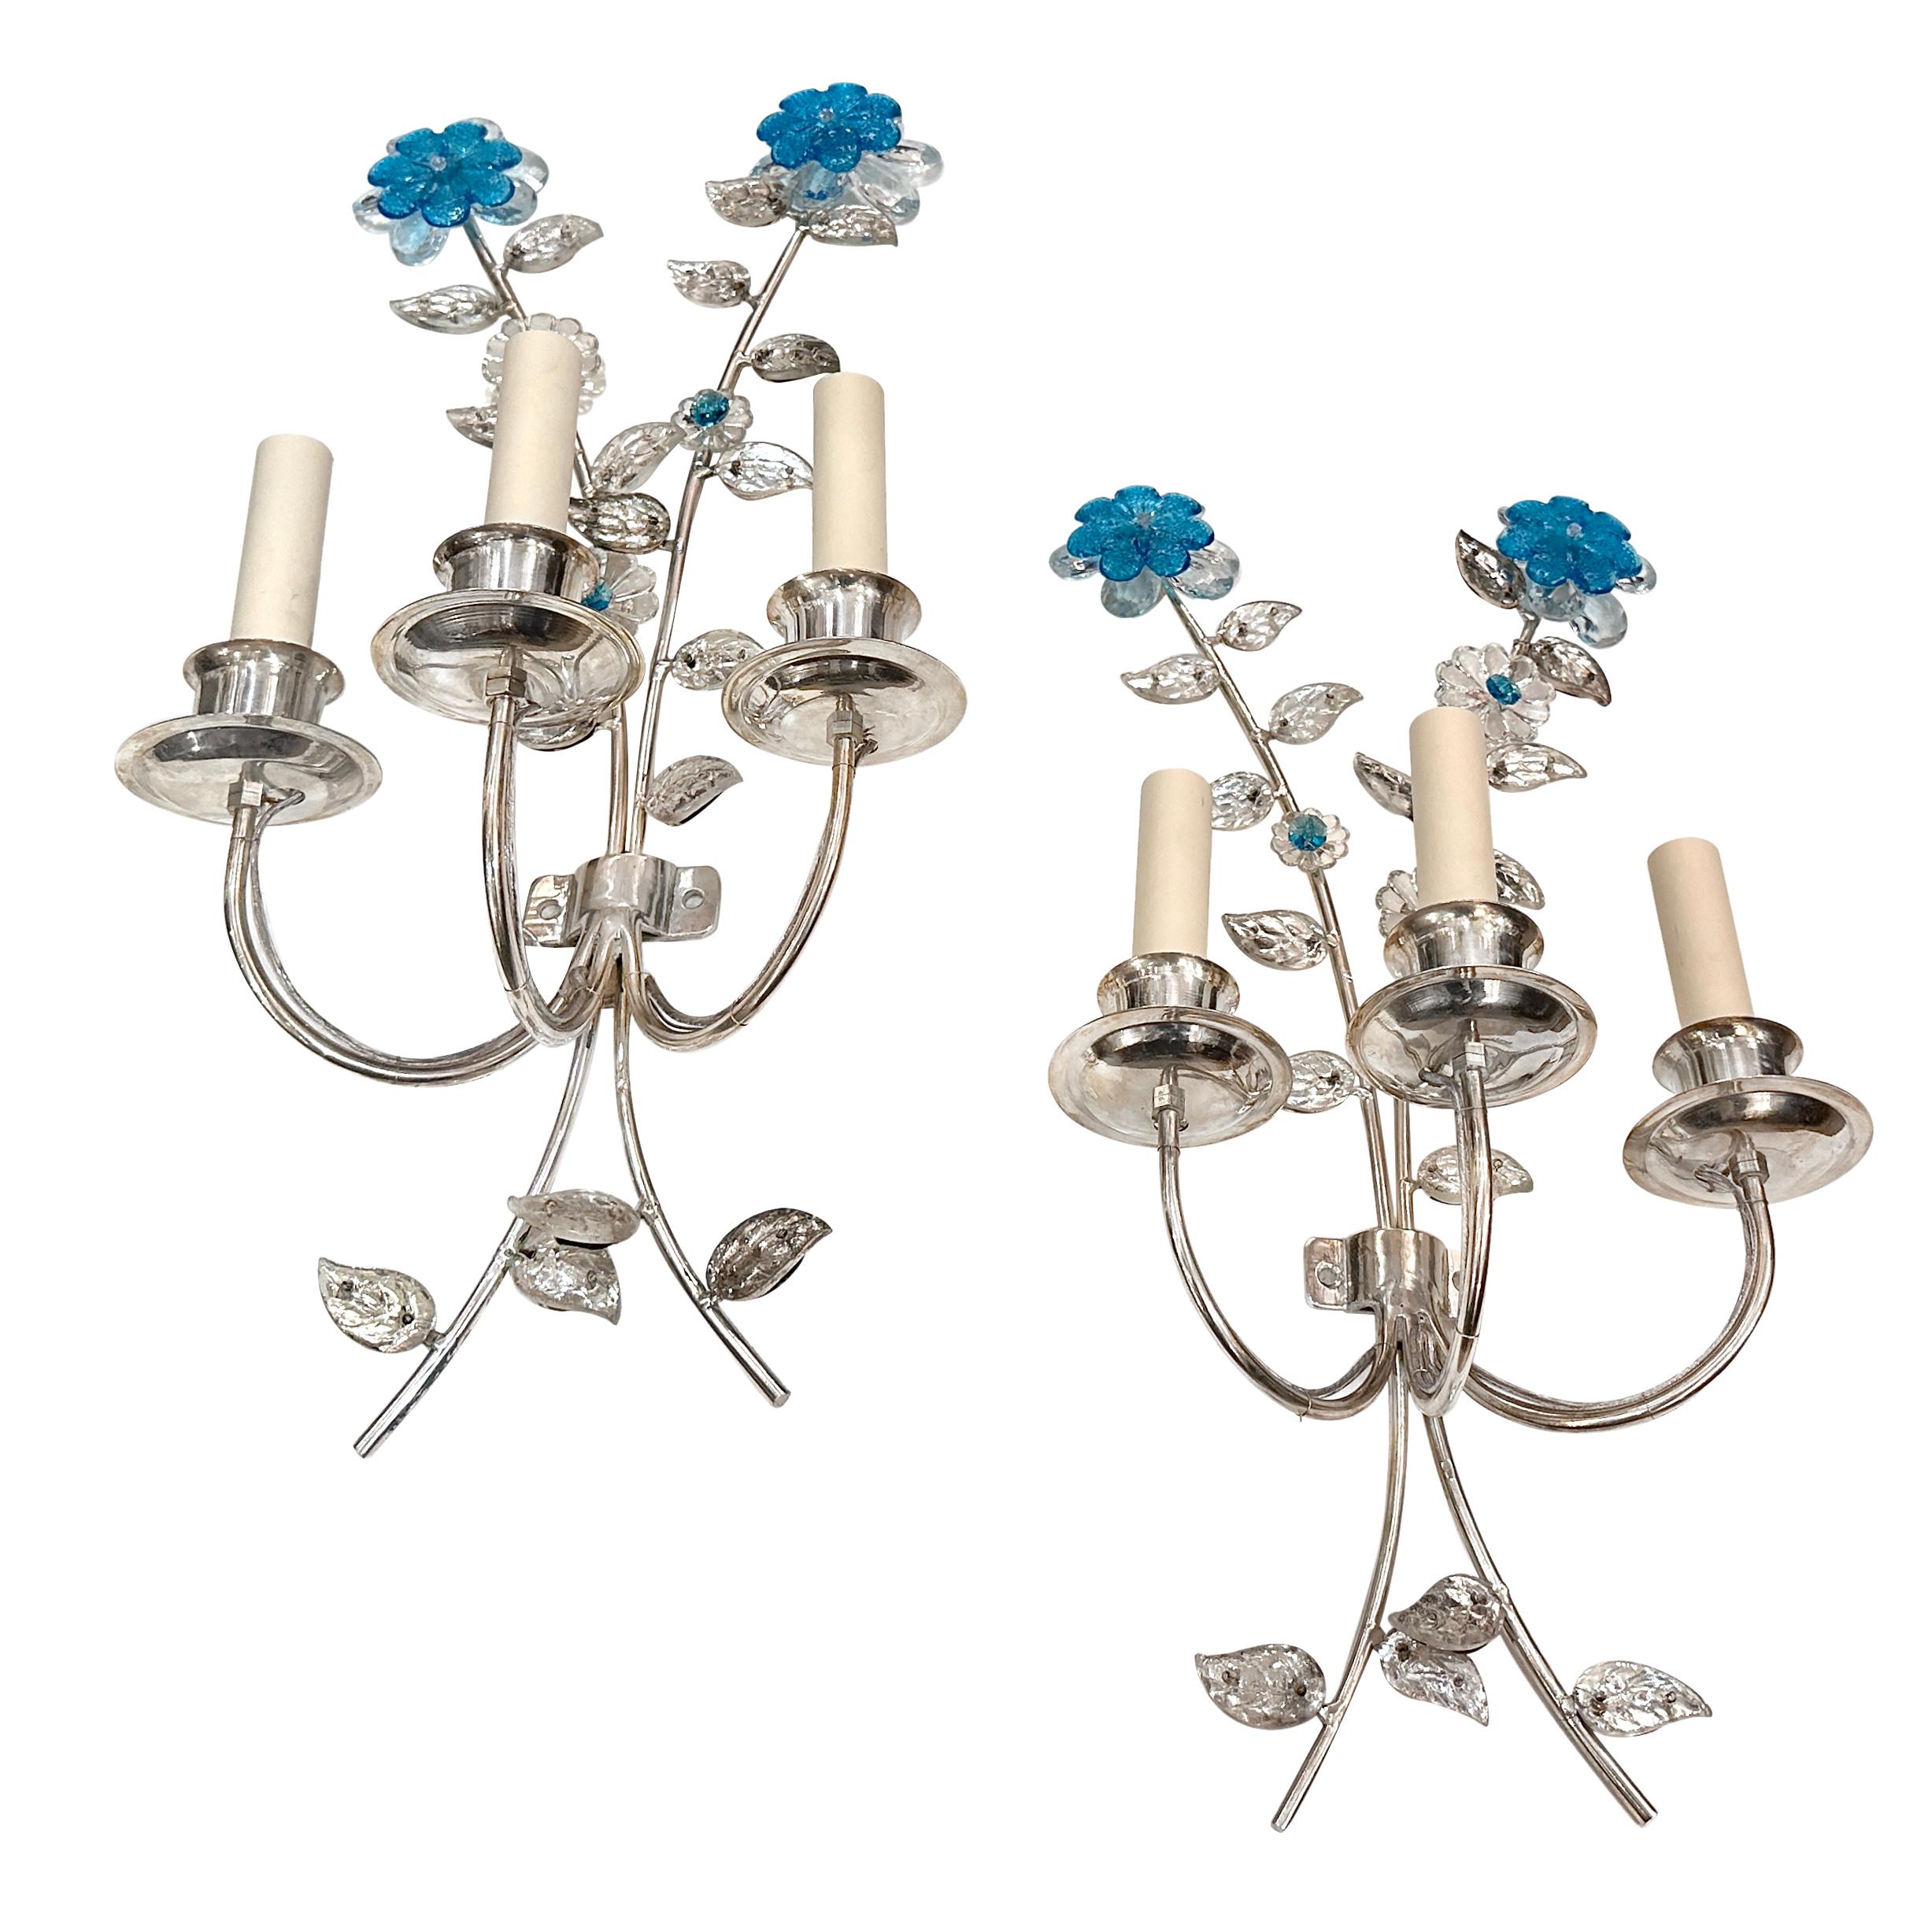 Set of 4 French 1950's silver plated sconces with turquoise color flowers. Sold per pair.

Measurements:
Height: 22